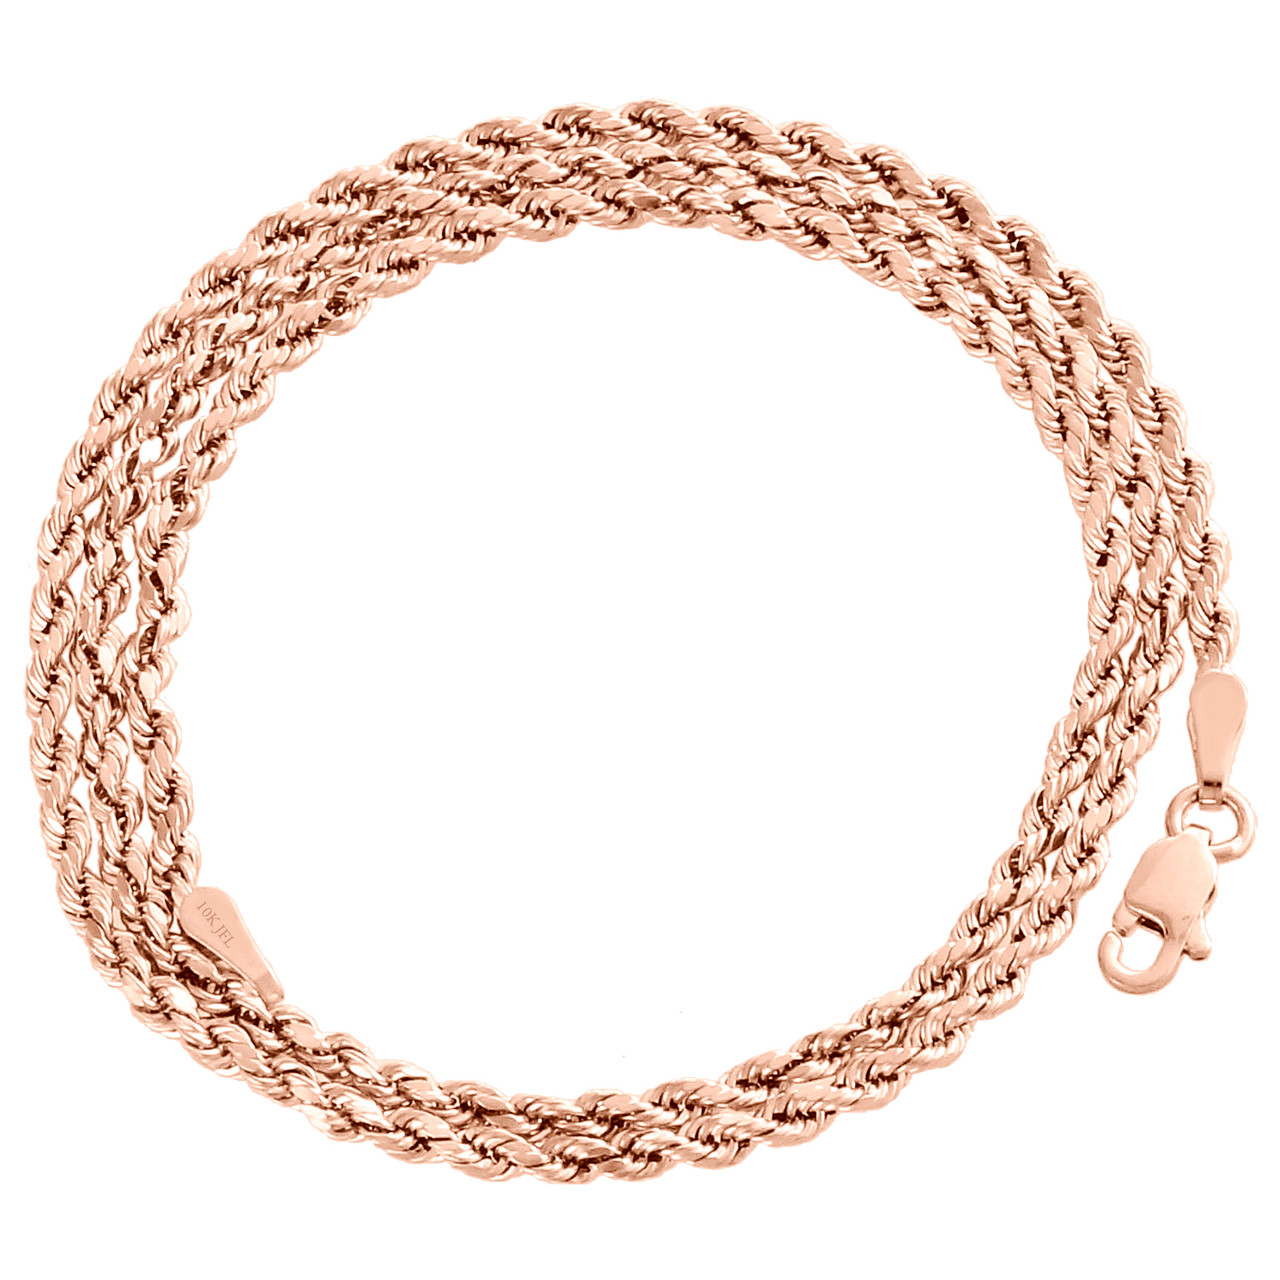 Hollow Rope Necklace 14K Rose Gold 30 Length 2.4mm | Jared